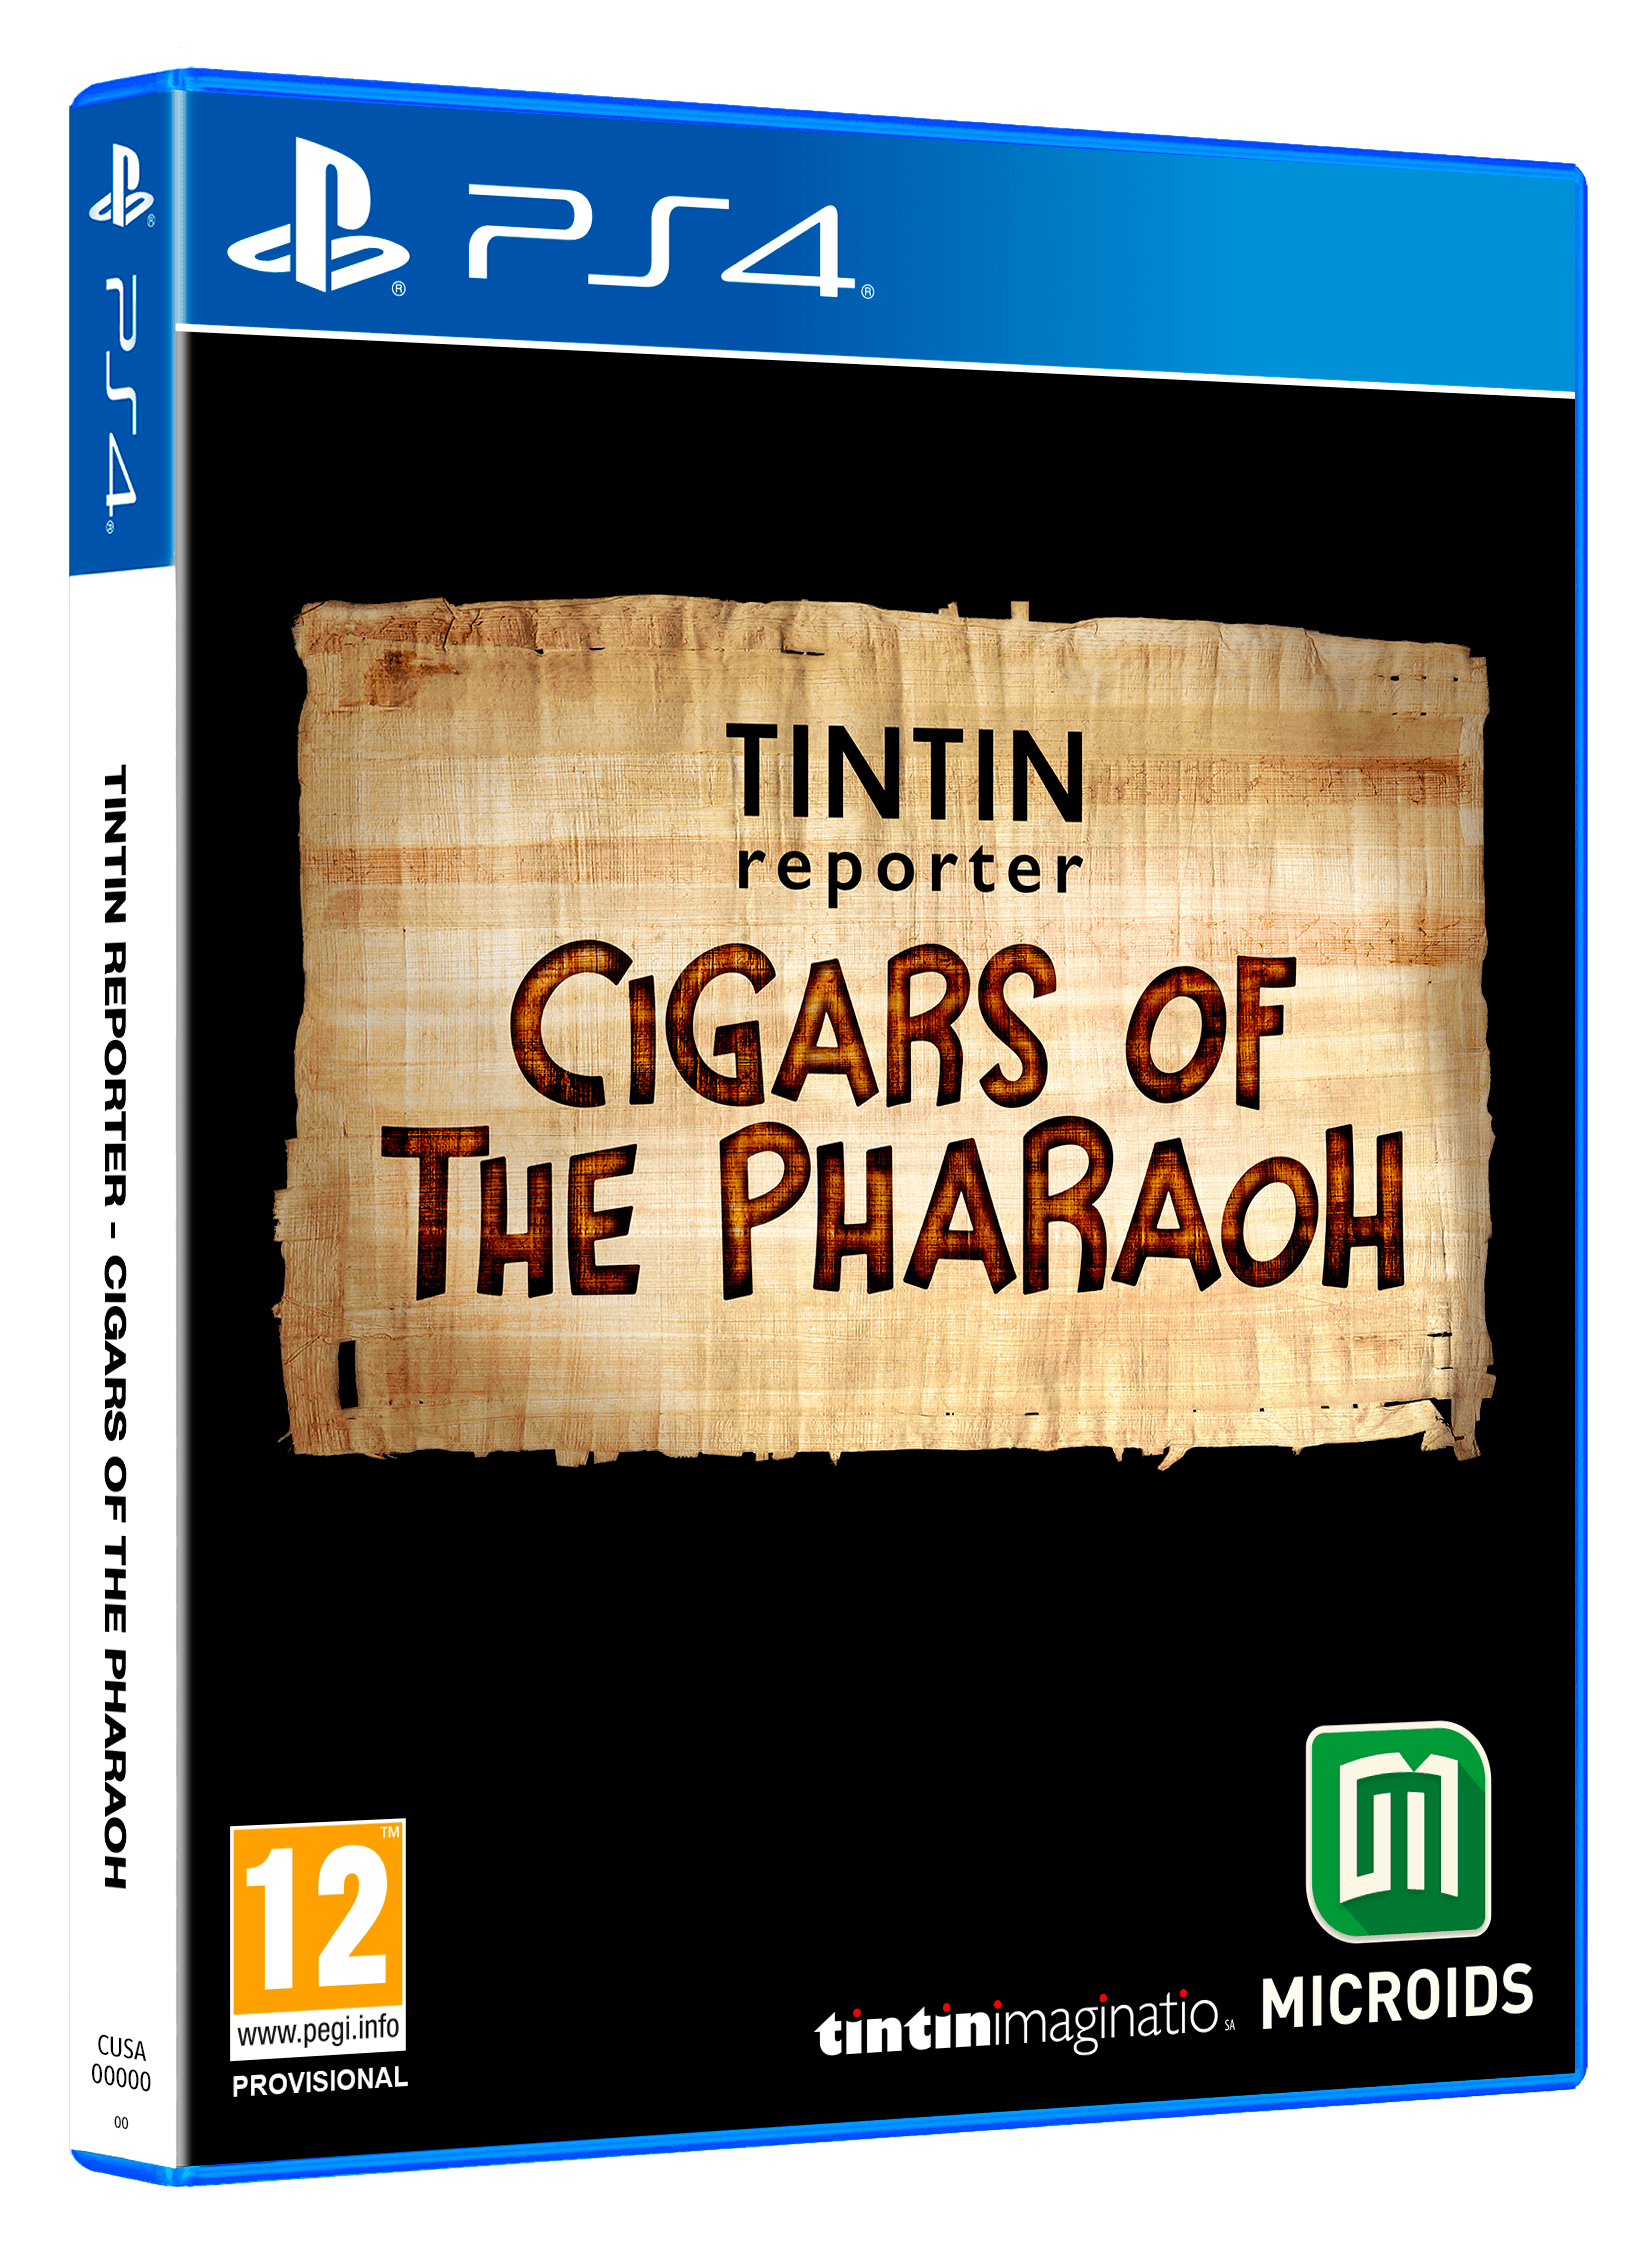 PlayStation 4 - Tintin Reporter: Cigars of the Pharaoh - Limited Edition - Want a New Gadget